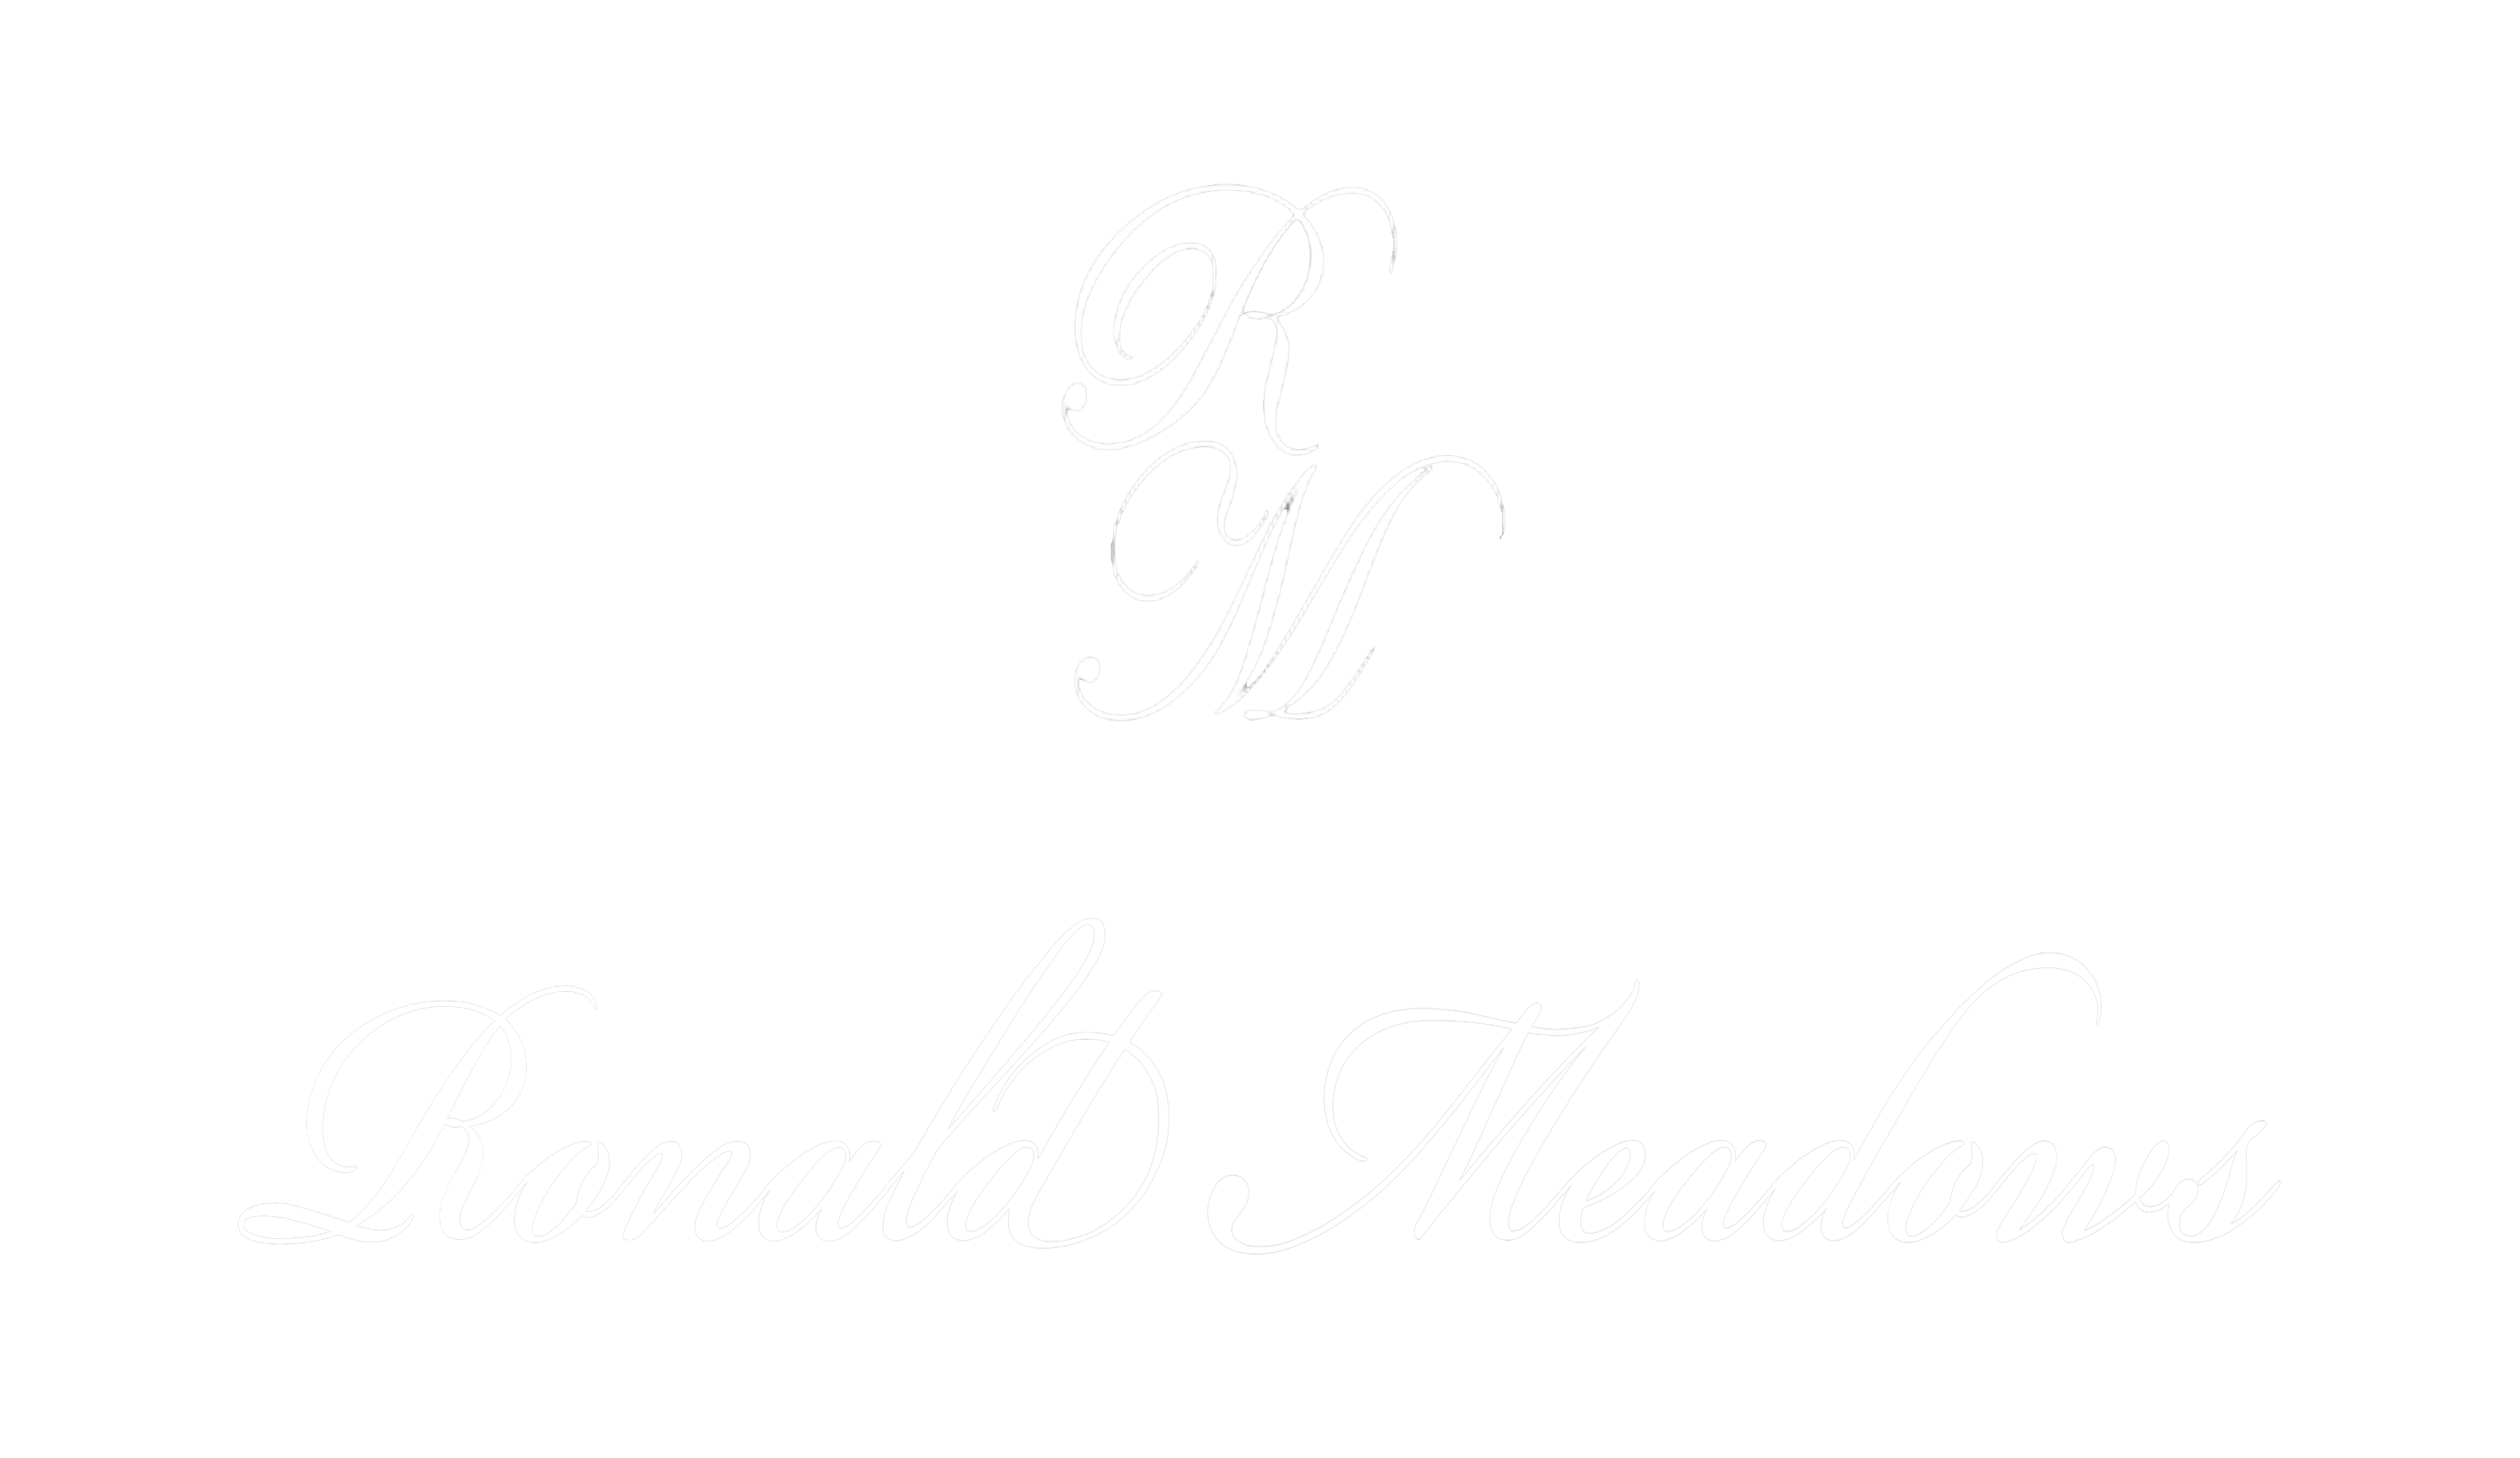 Ronald Meadows Funeral Parlor and Cremation Center Logo